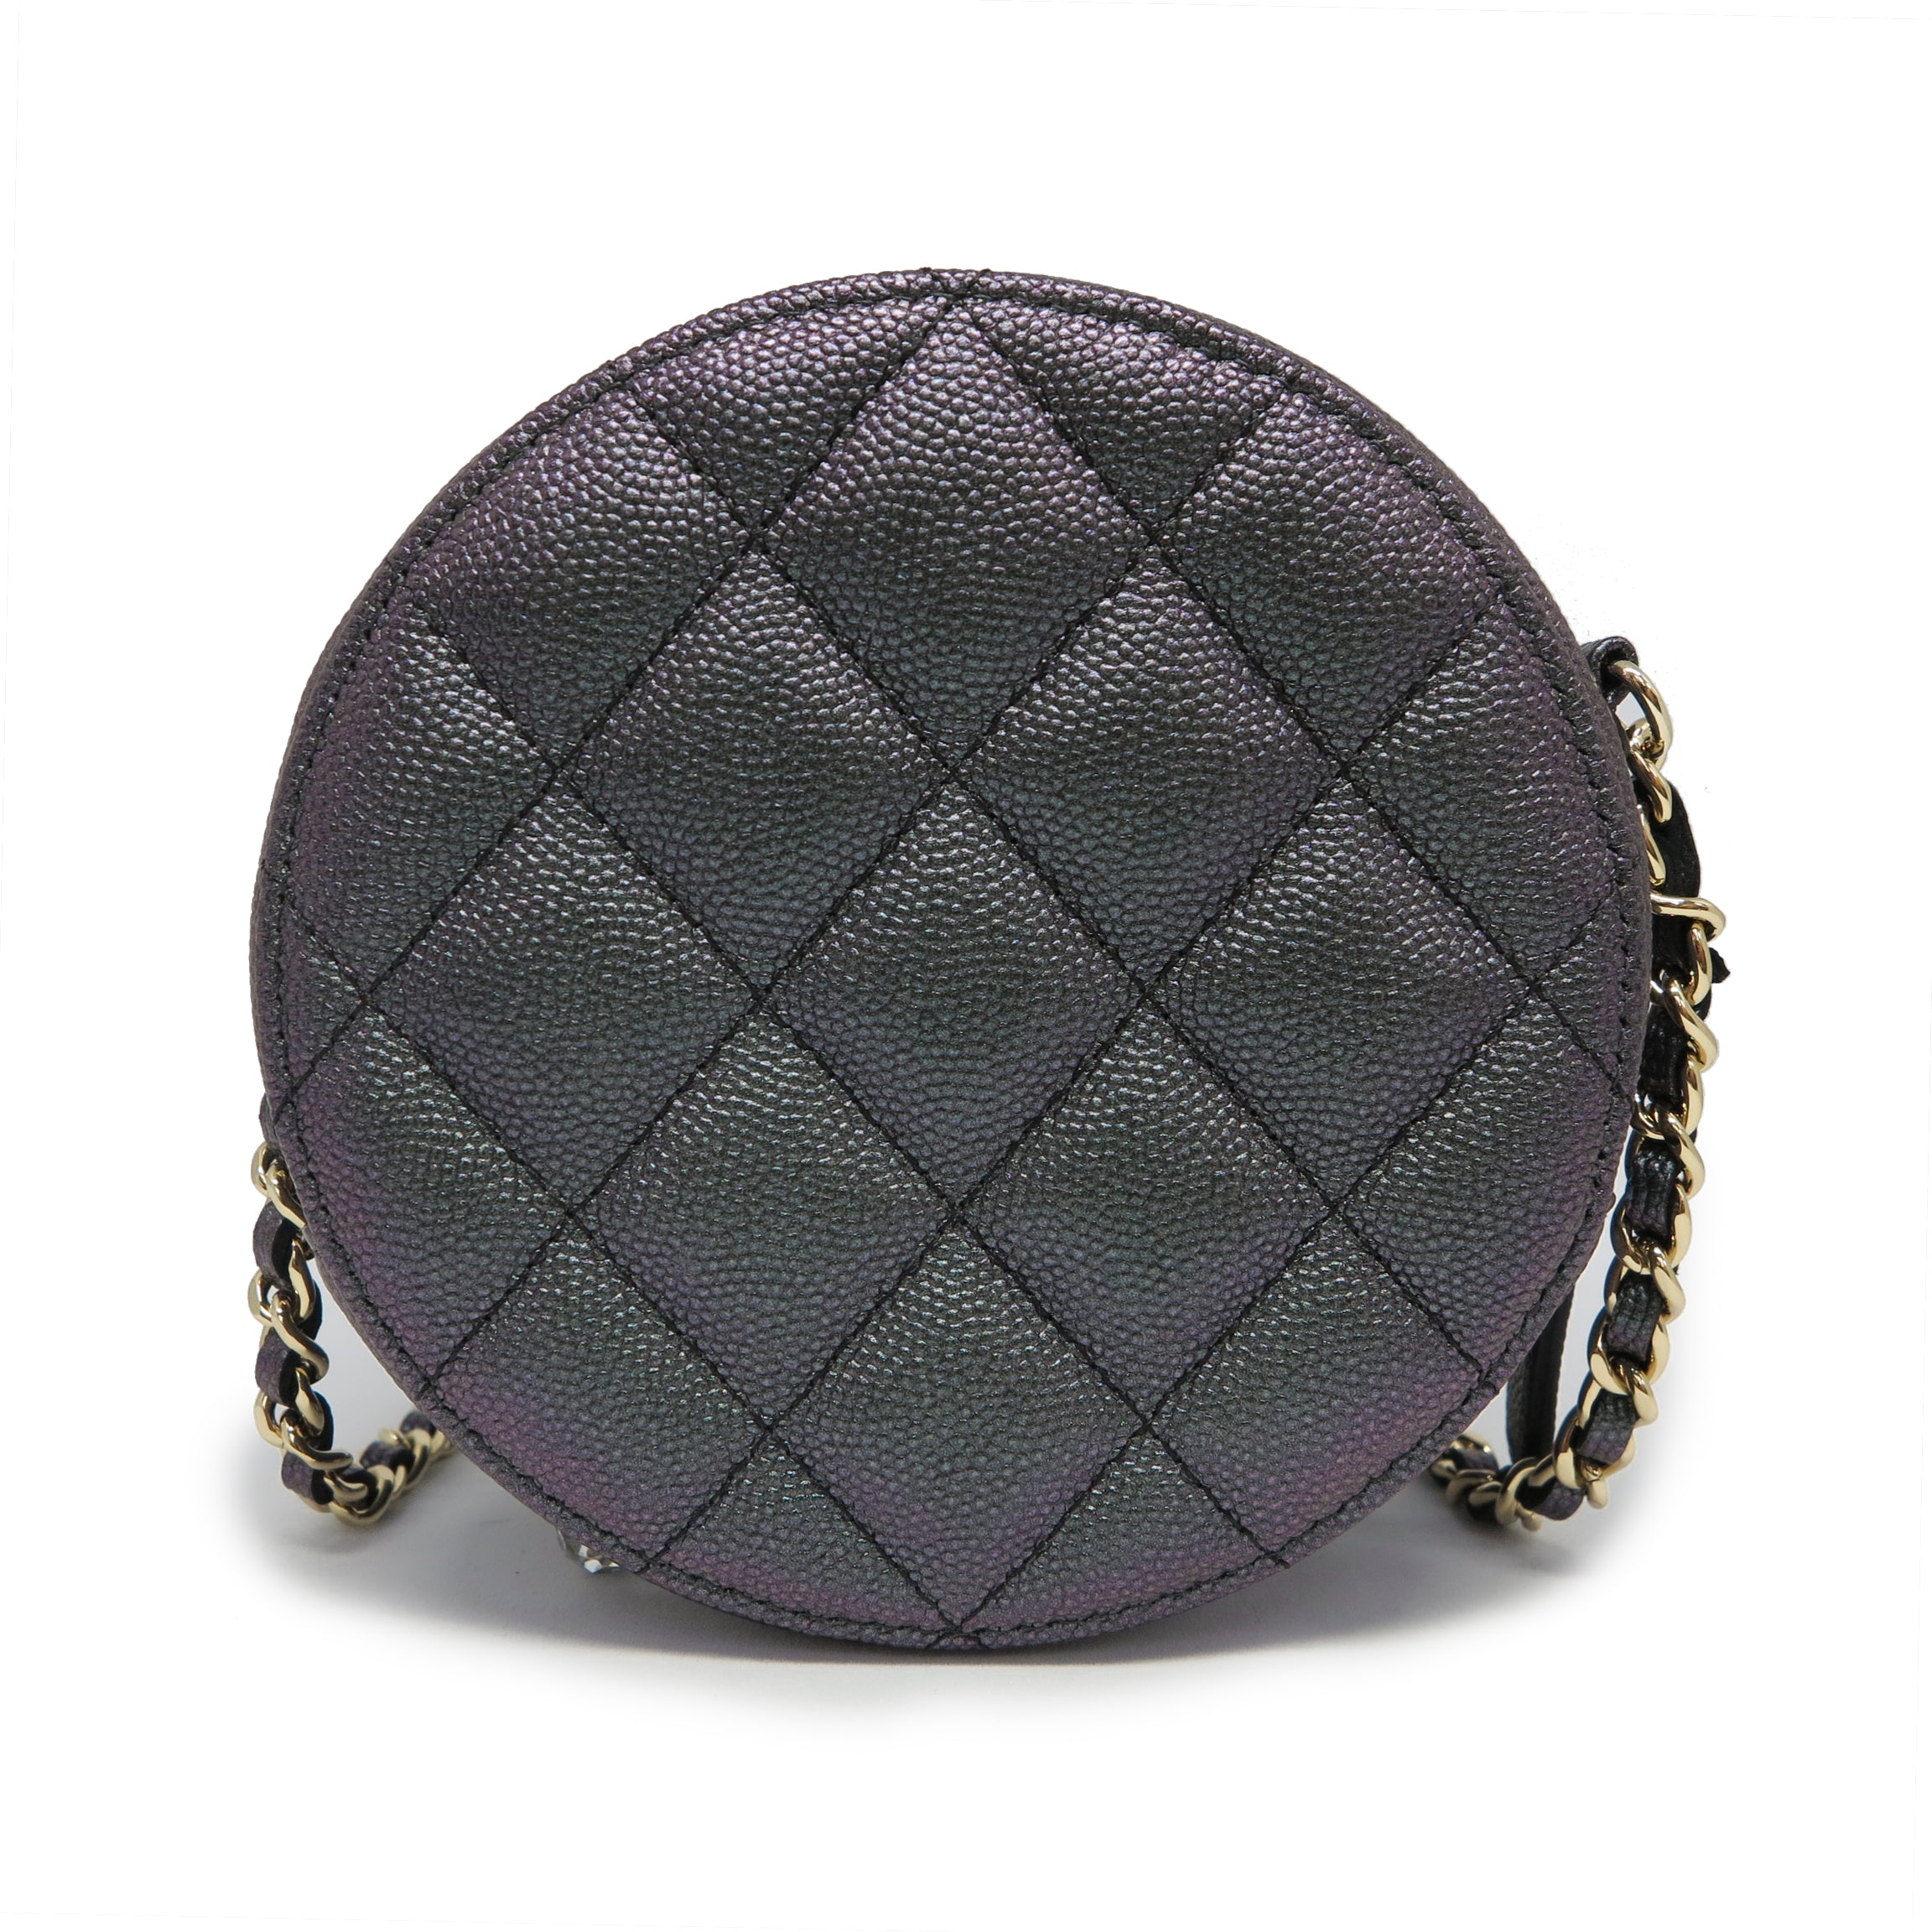 Round Clutch With Chain in Iridescent Black Caviar